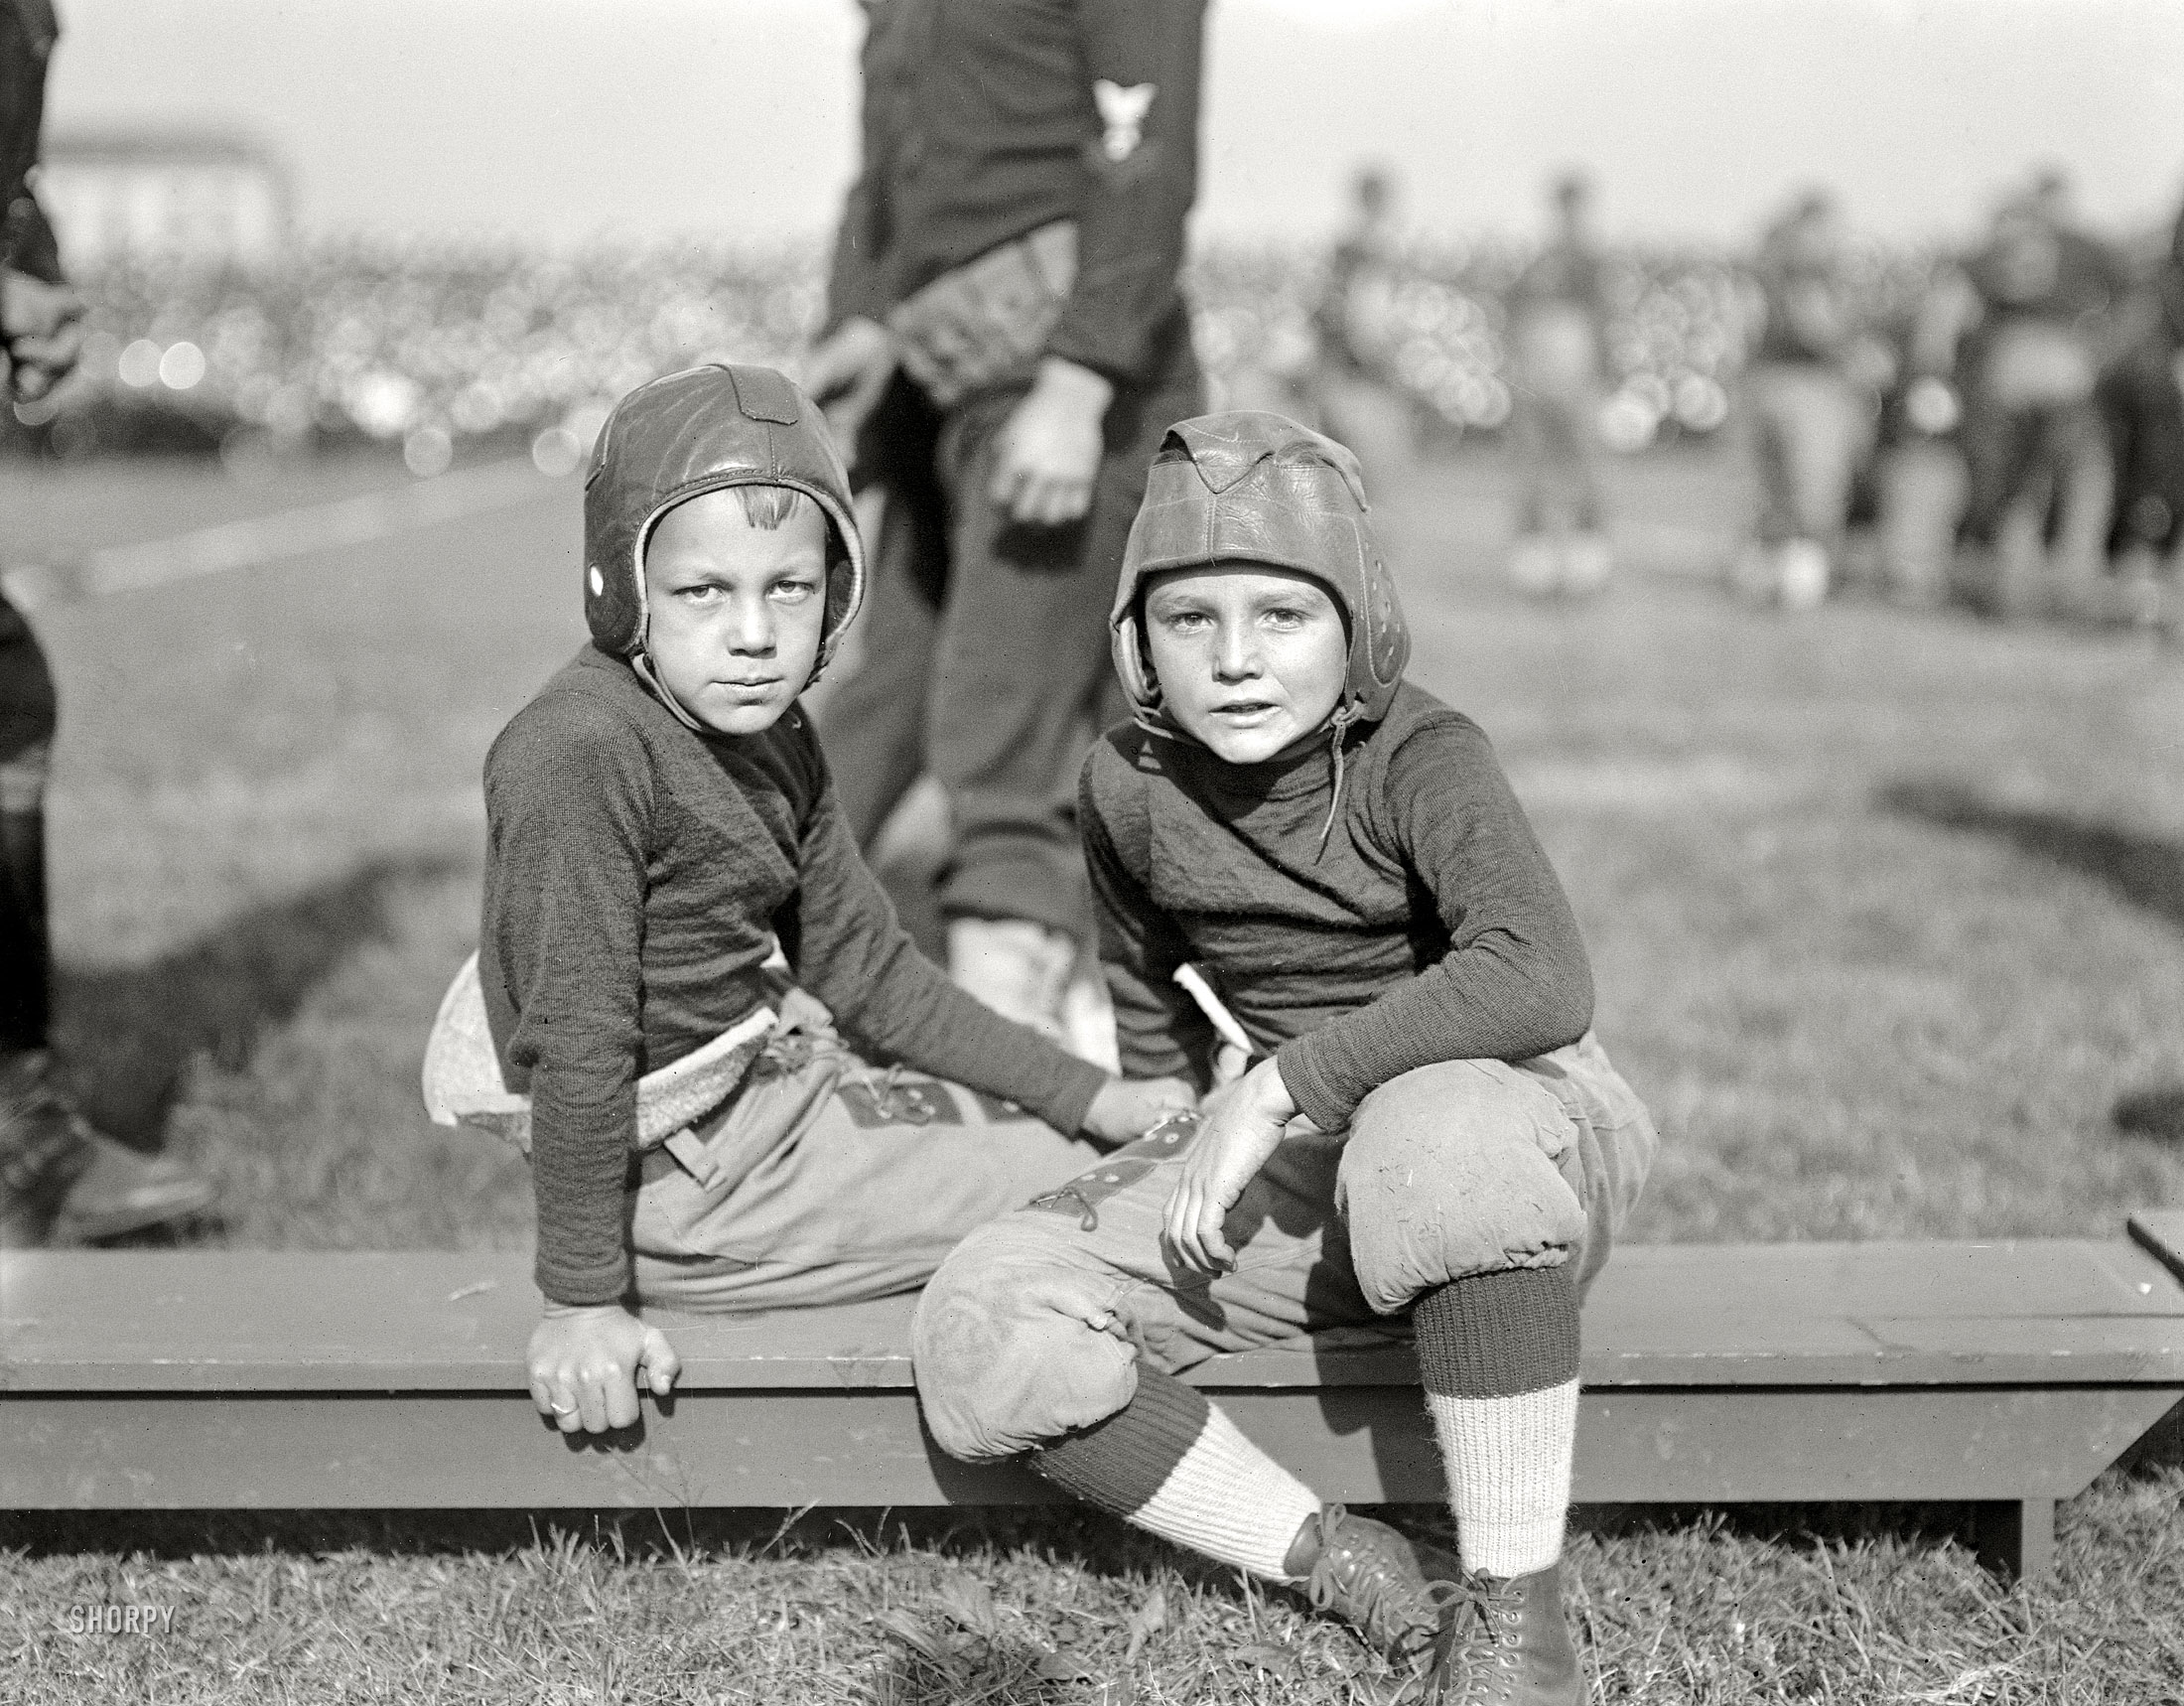 October 1922. "Football." Two little leatherheads at the Navy-Georgia Tech game in Annapolis. Harris & Ewing Collection glass negative. View full size.